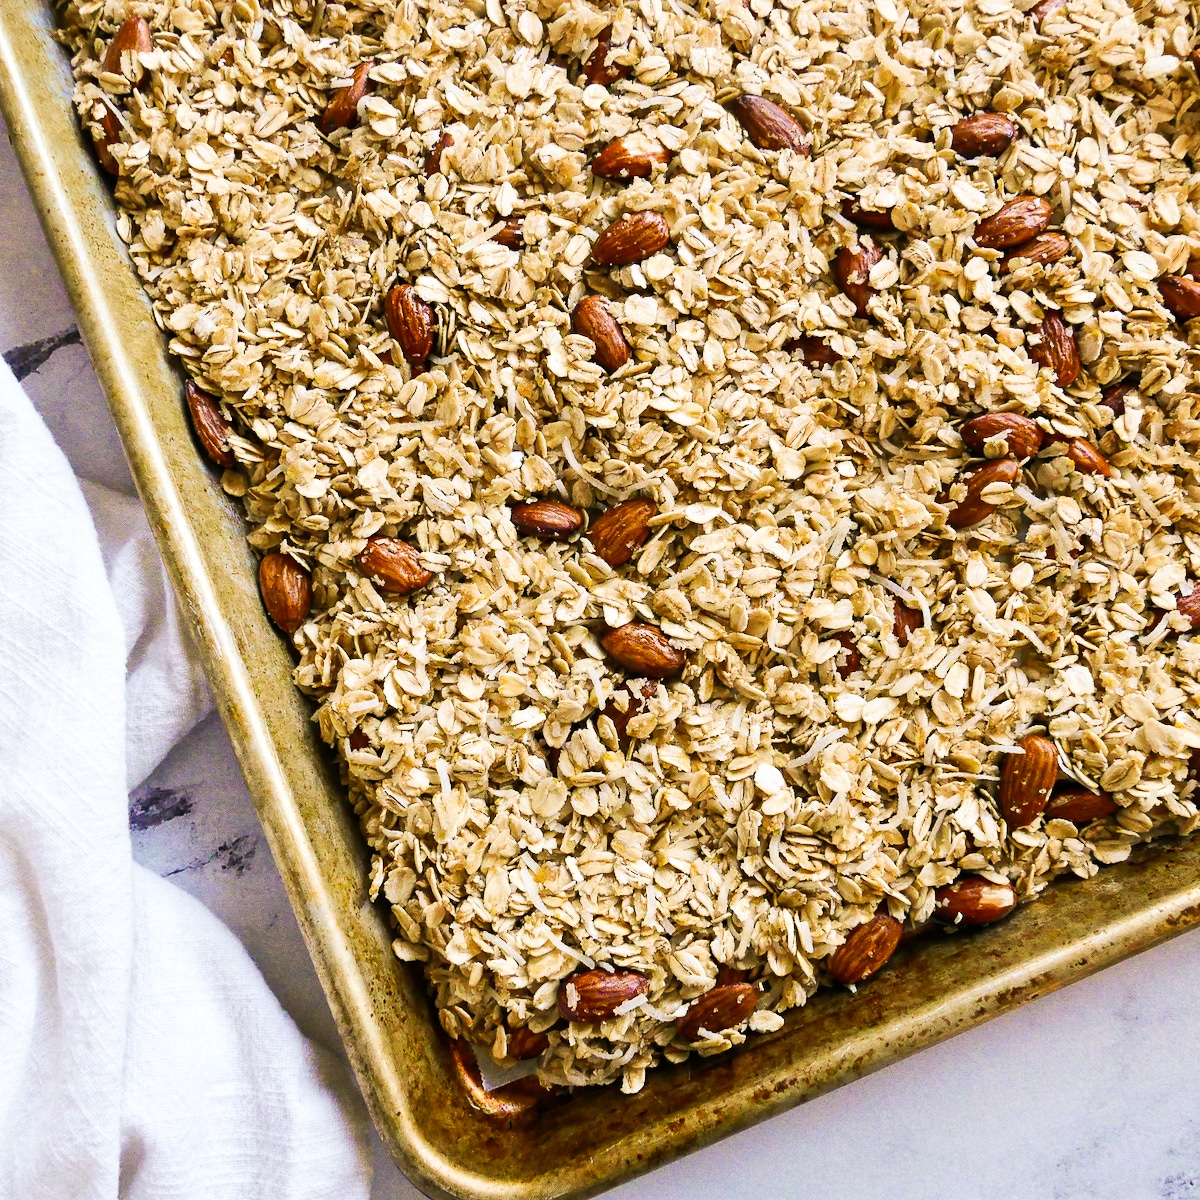 Granola mixture spread out onto a parchment lined baking sheet.